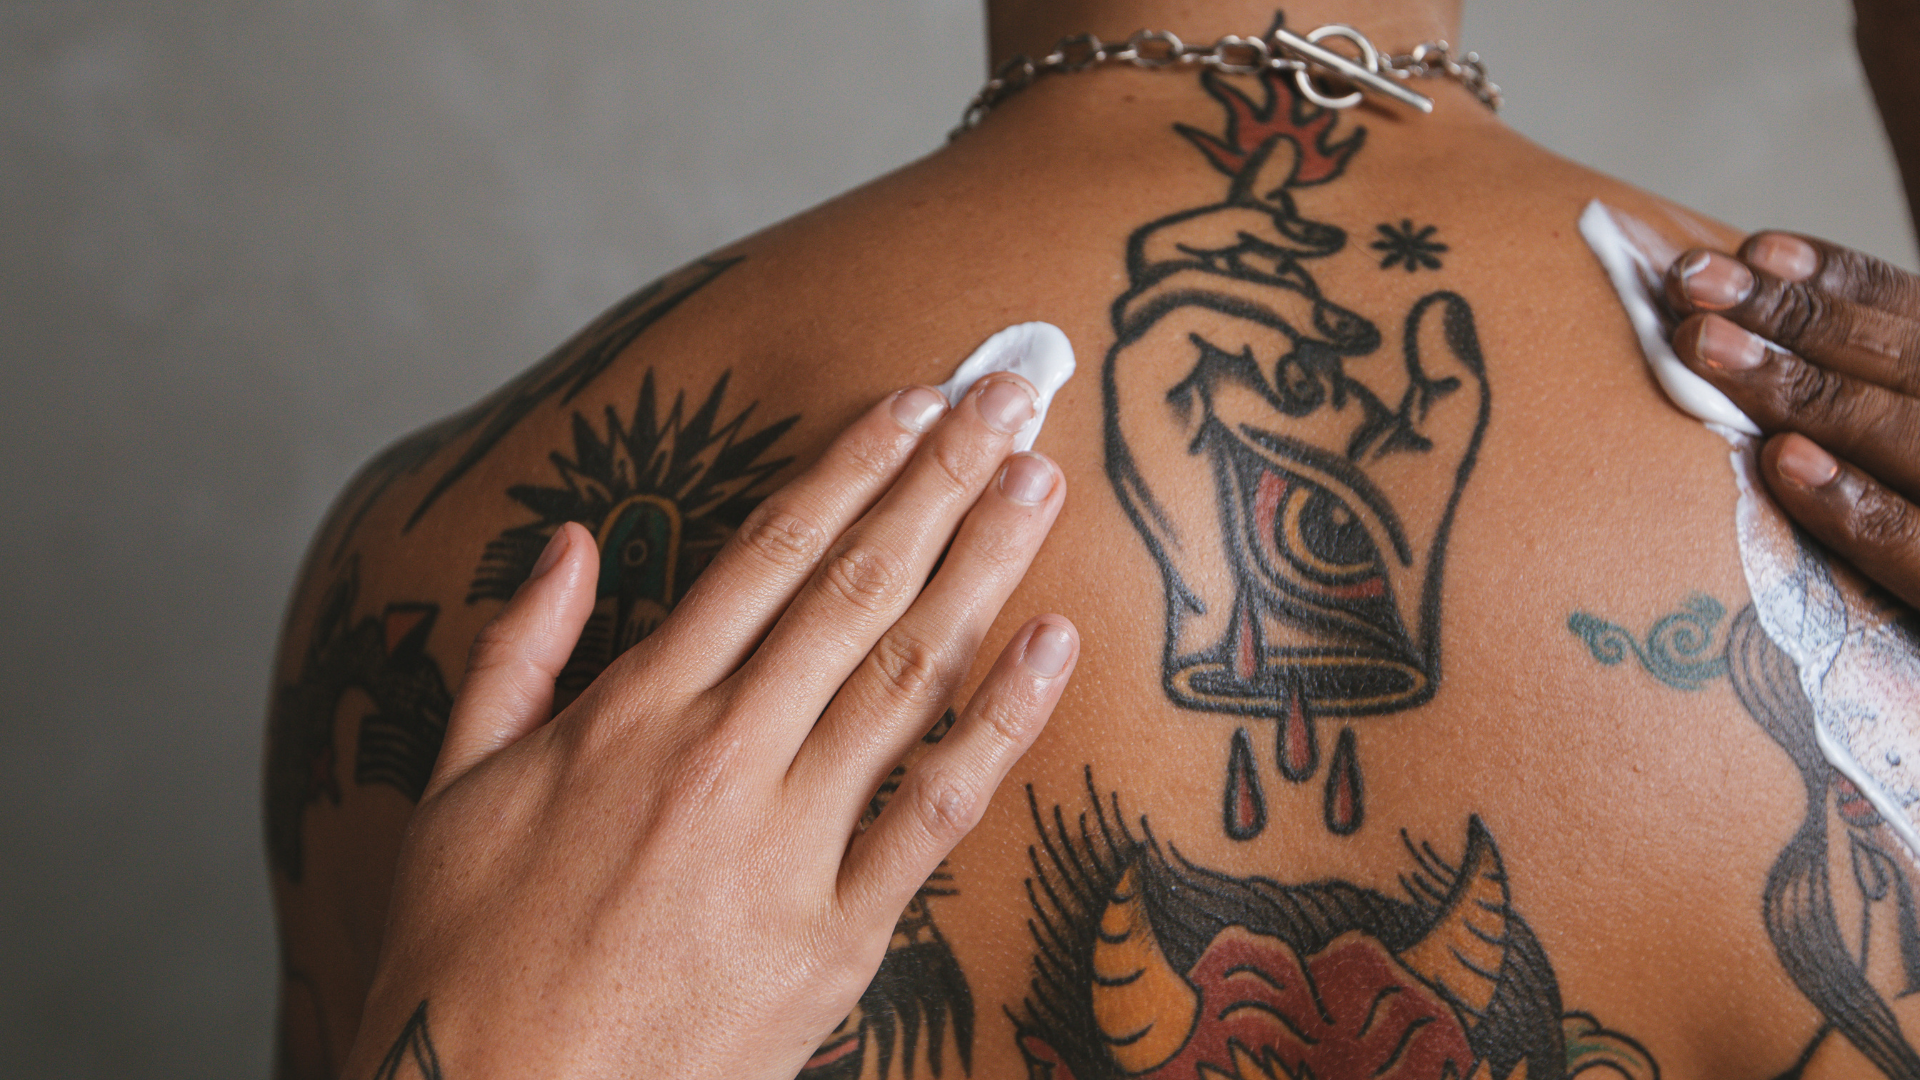 The Advantages Of Getting A Piercing At A Tattoo Phuket Studio